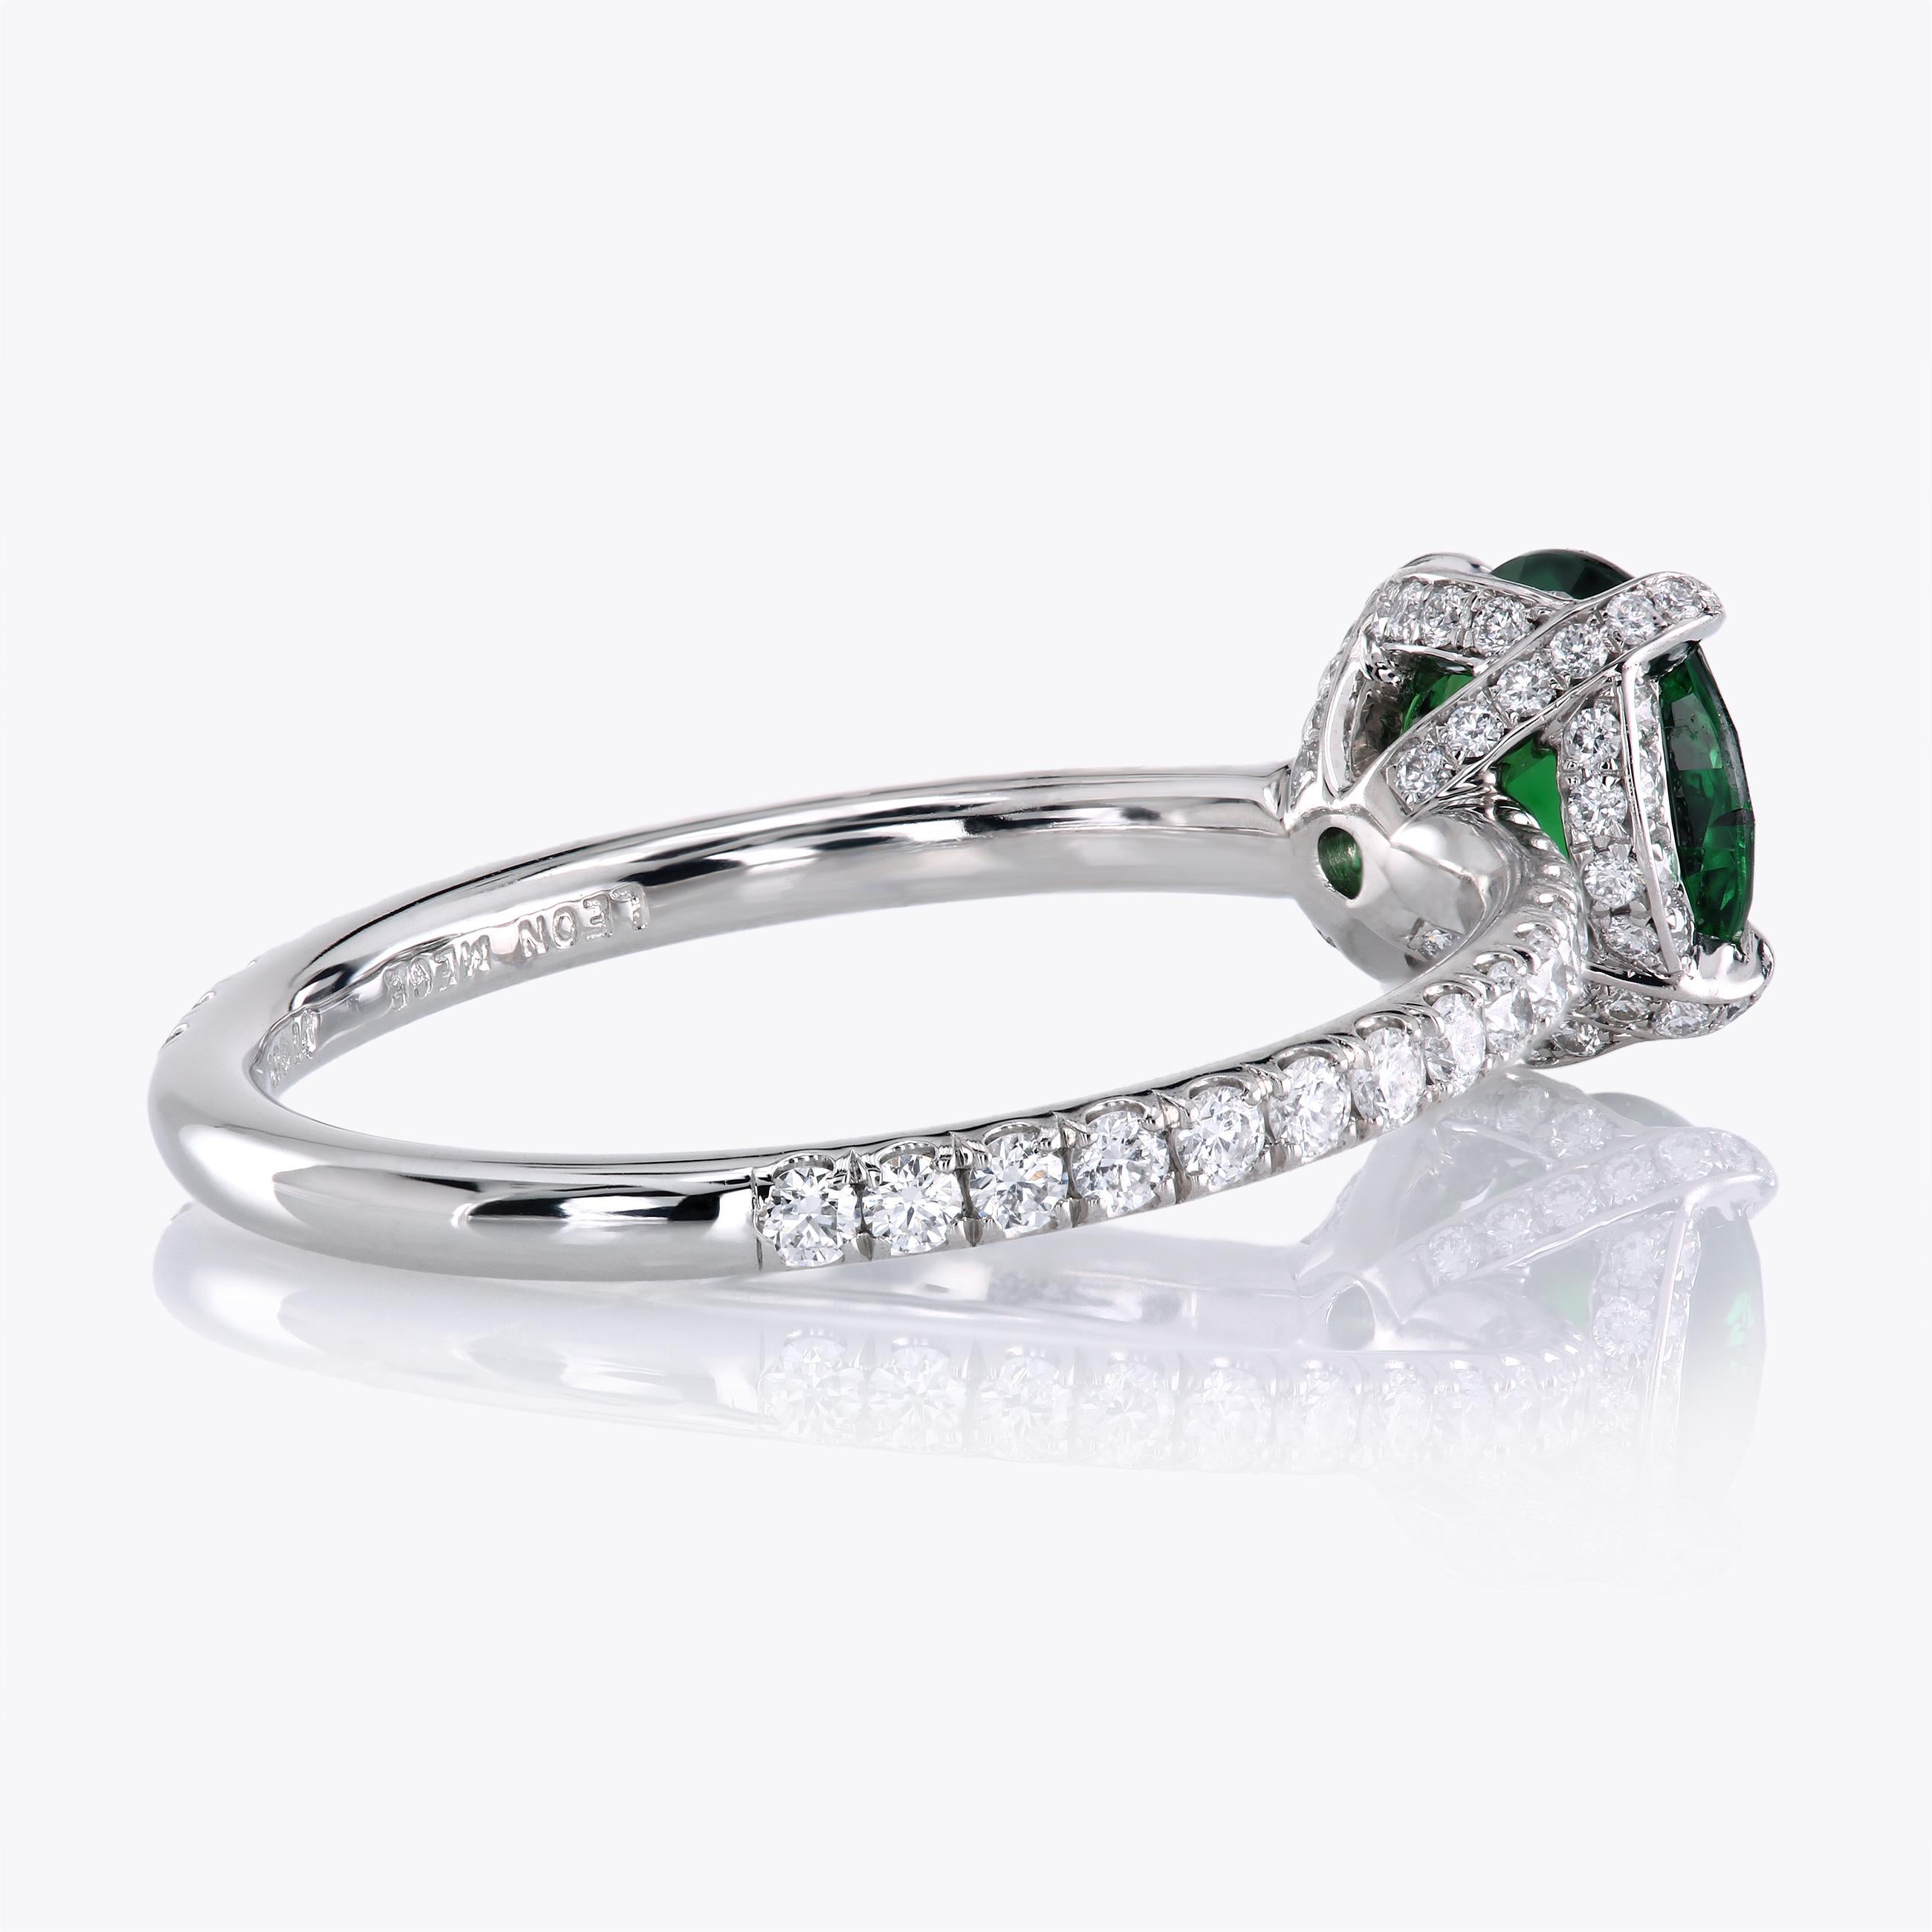 Leon Mege Vivid Round Green Tsavorite Garnet in Micro Pave Platinum Ring In New Condition For Sale In New York, NY